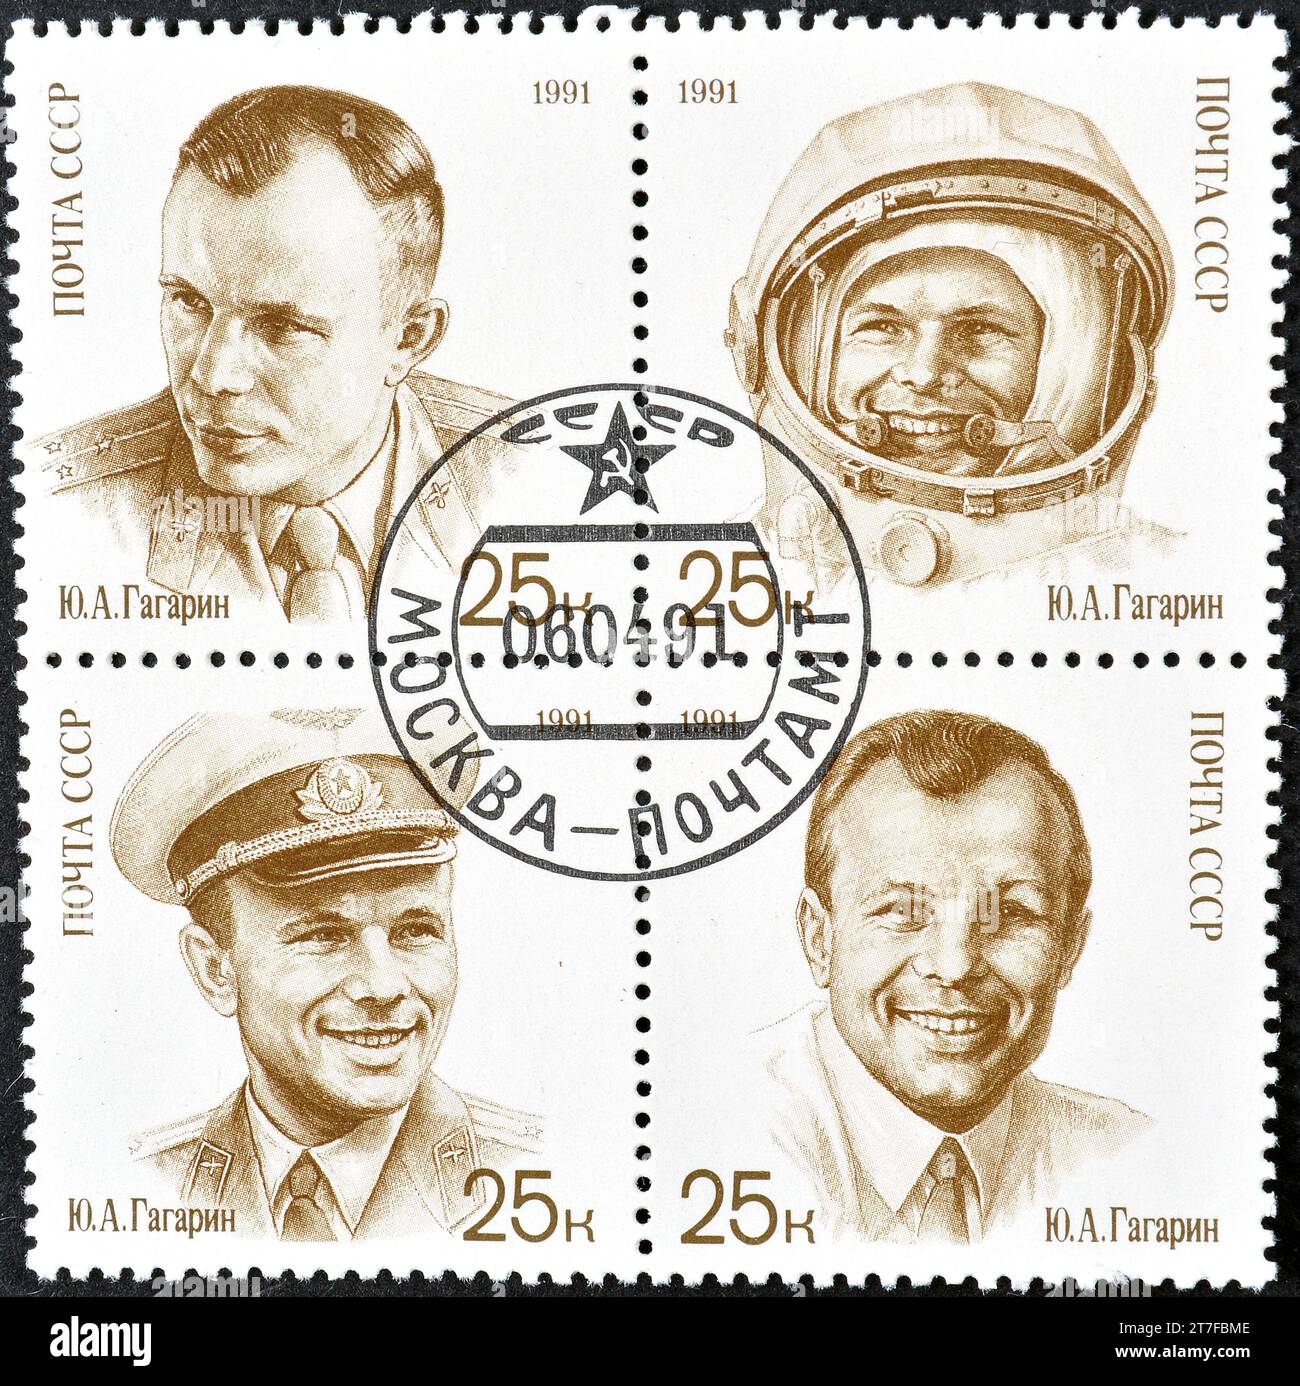 Cancelled postage stamps printed by Soviet Union, that show Yuri Gagarin, 30th Anniversary of First Man in Space  circa 1991. Stock Photo